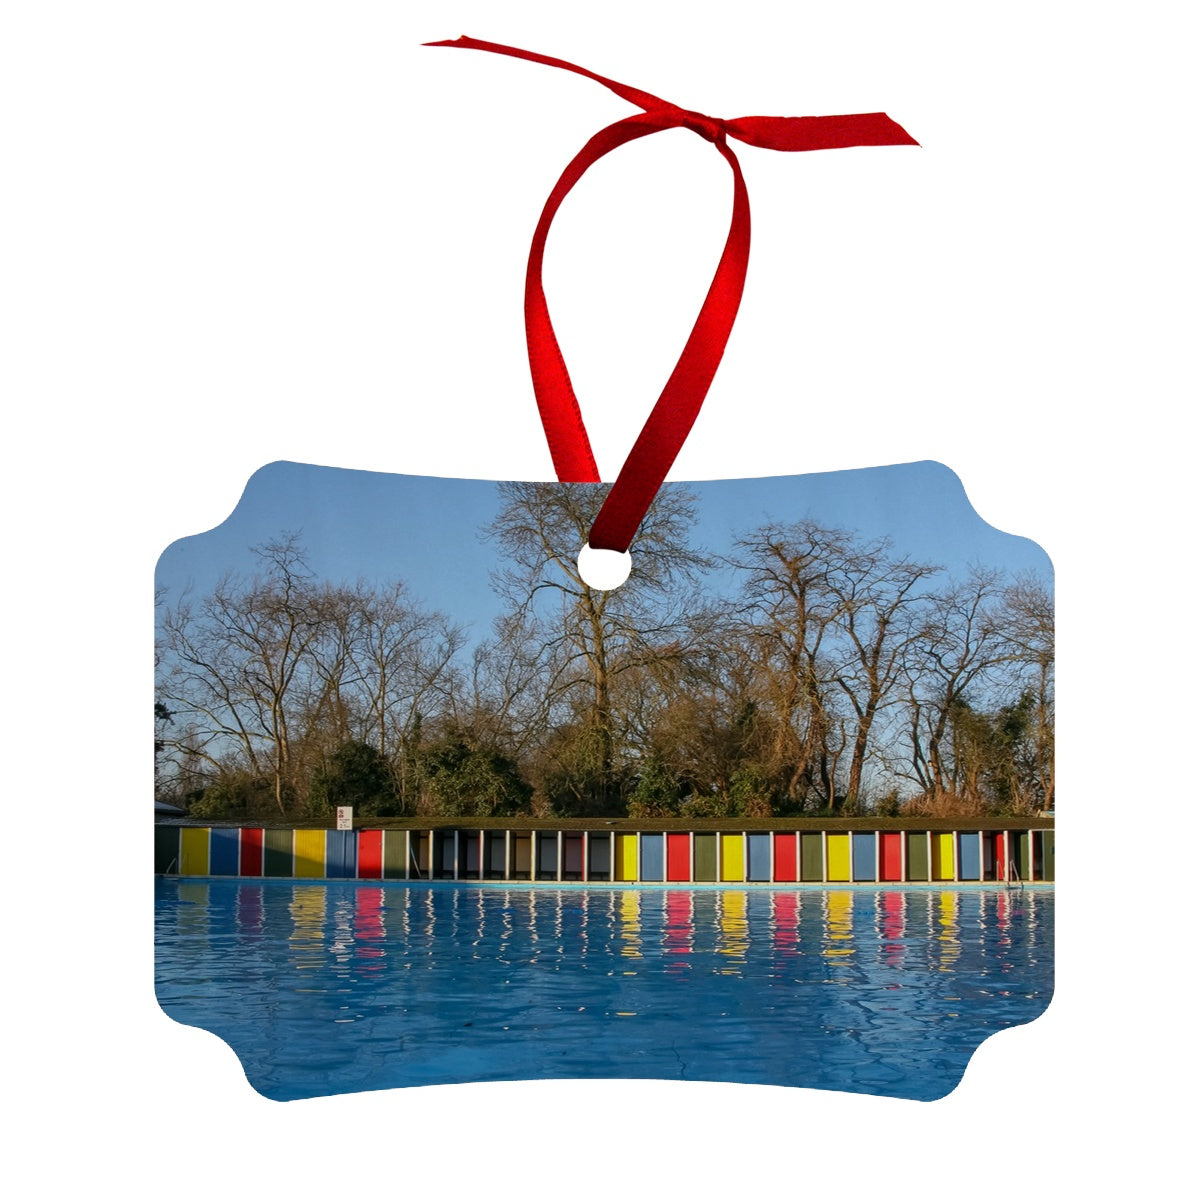 TOOTING BEC LIDO WITH TREES Wood Ornament - Amy Adams Photography